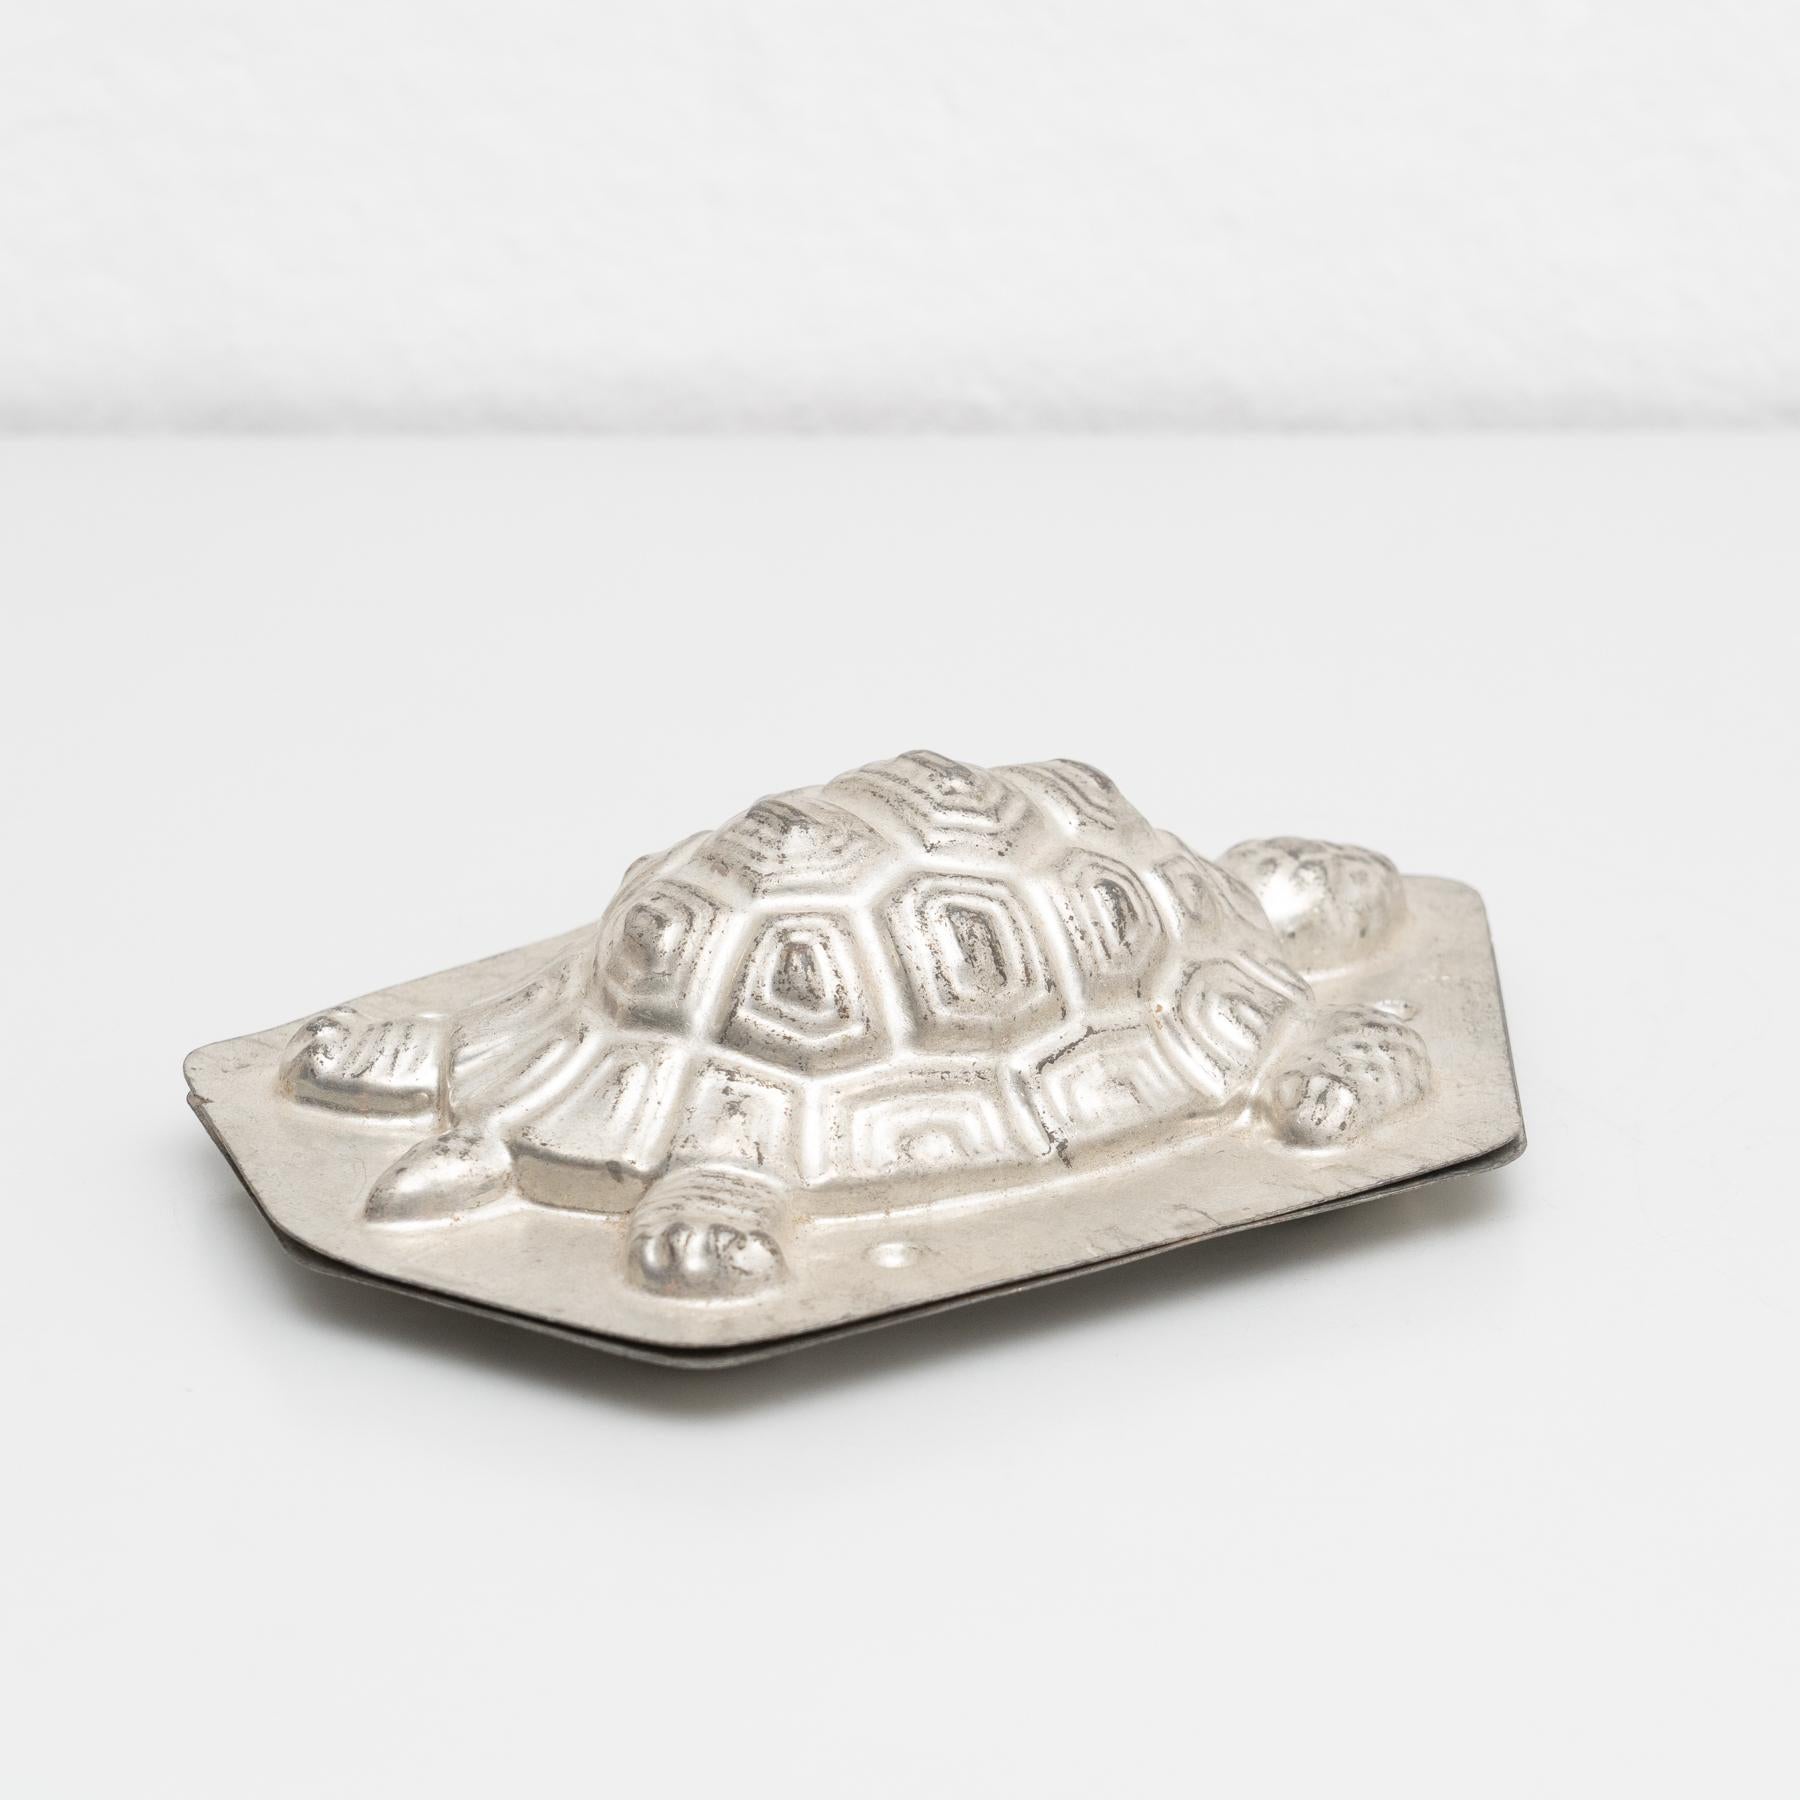 Antique Turtle Shaped Metal Cooking Mold, circa 1950 For Sale 2